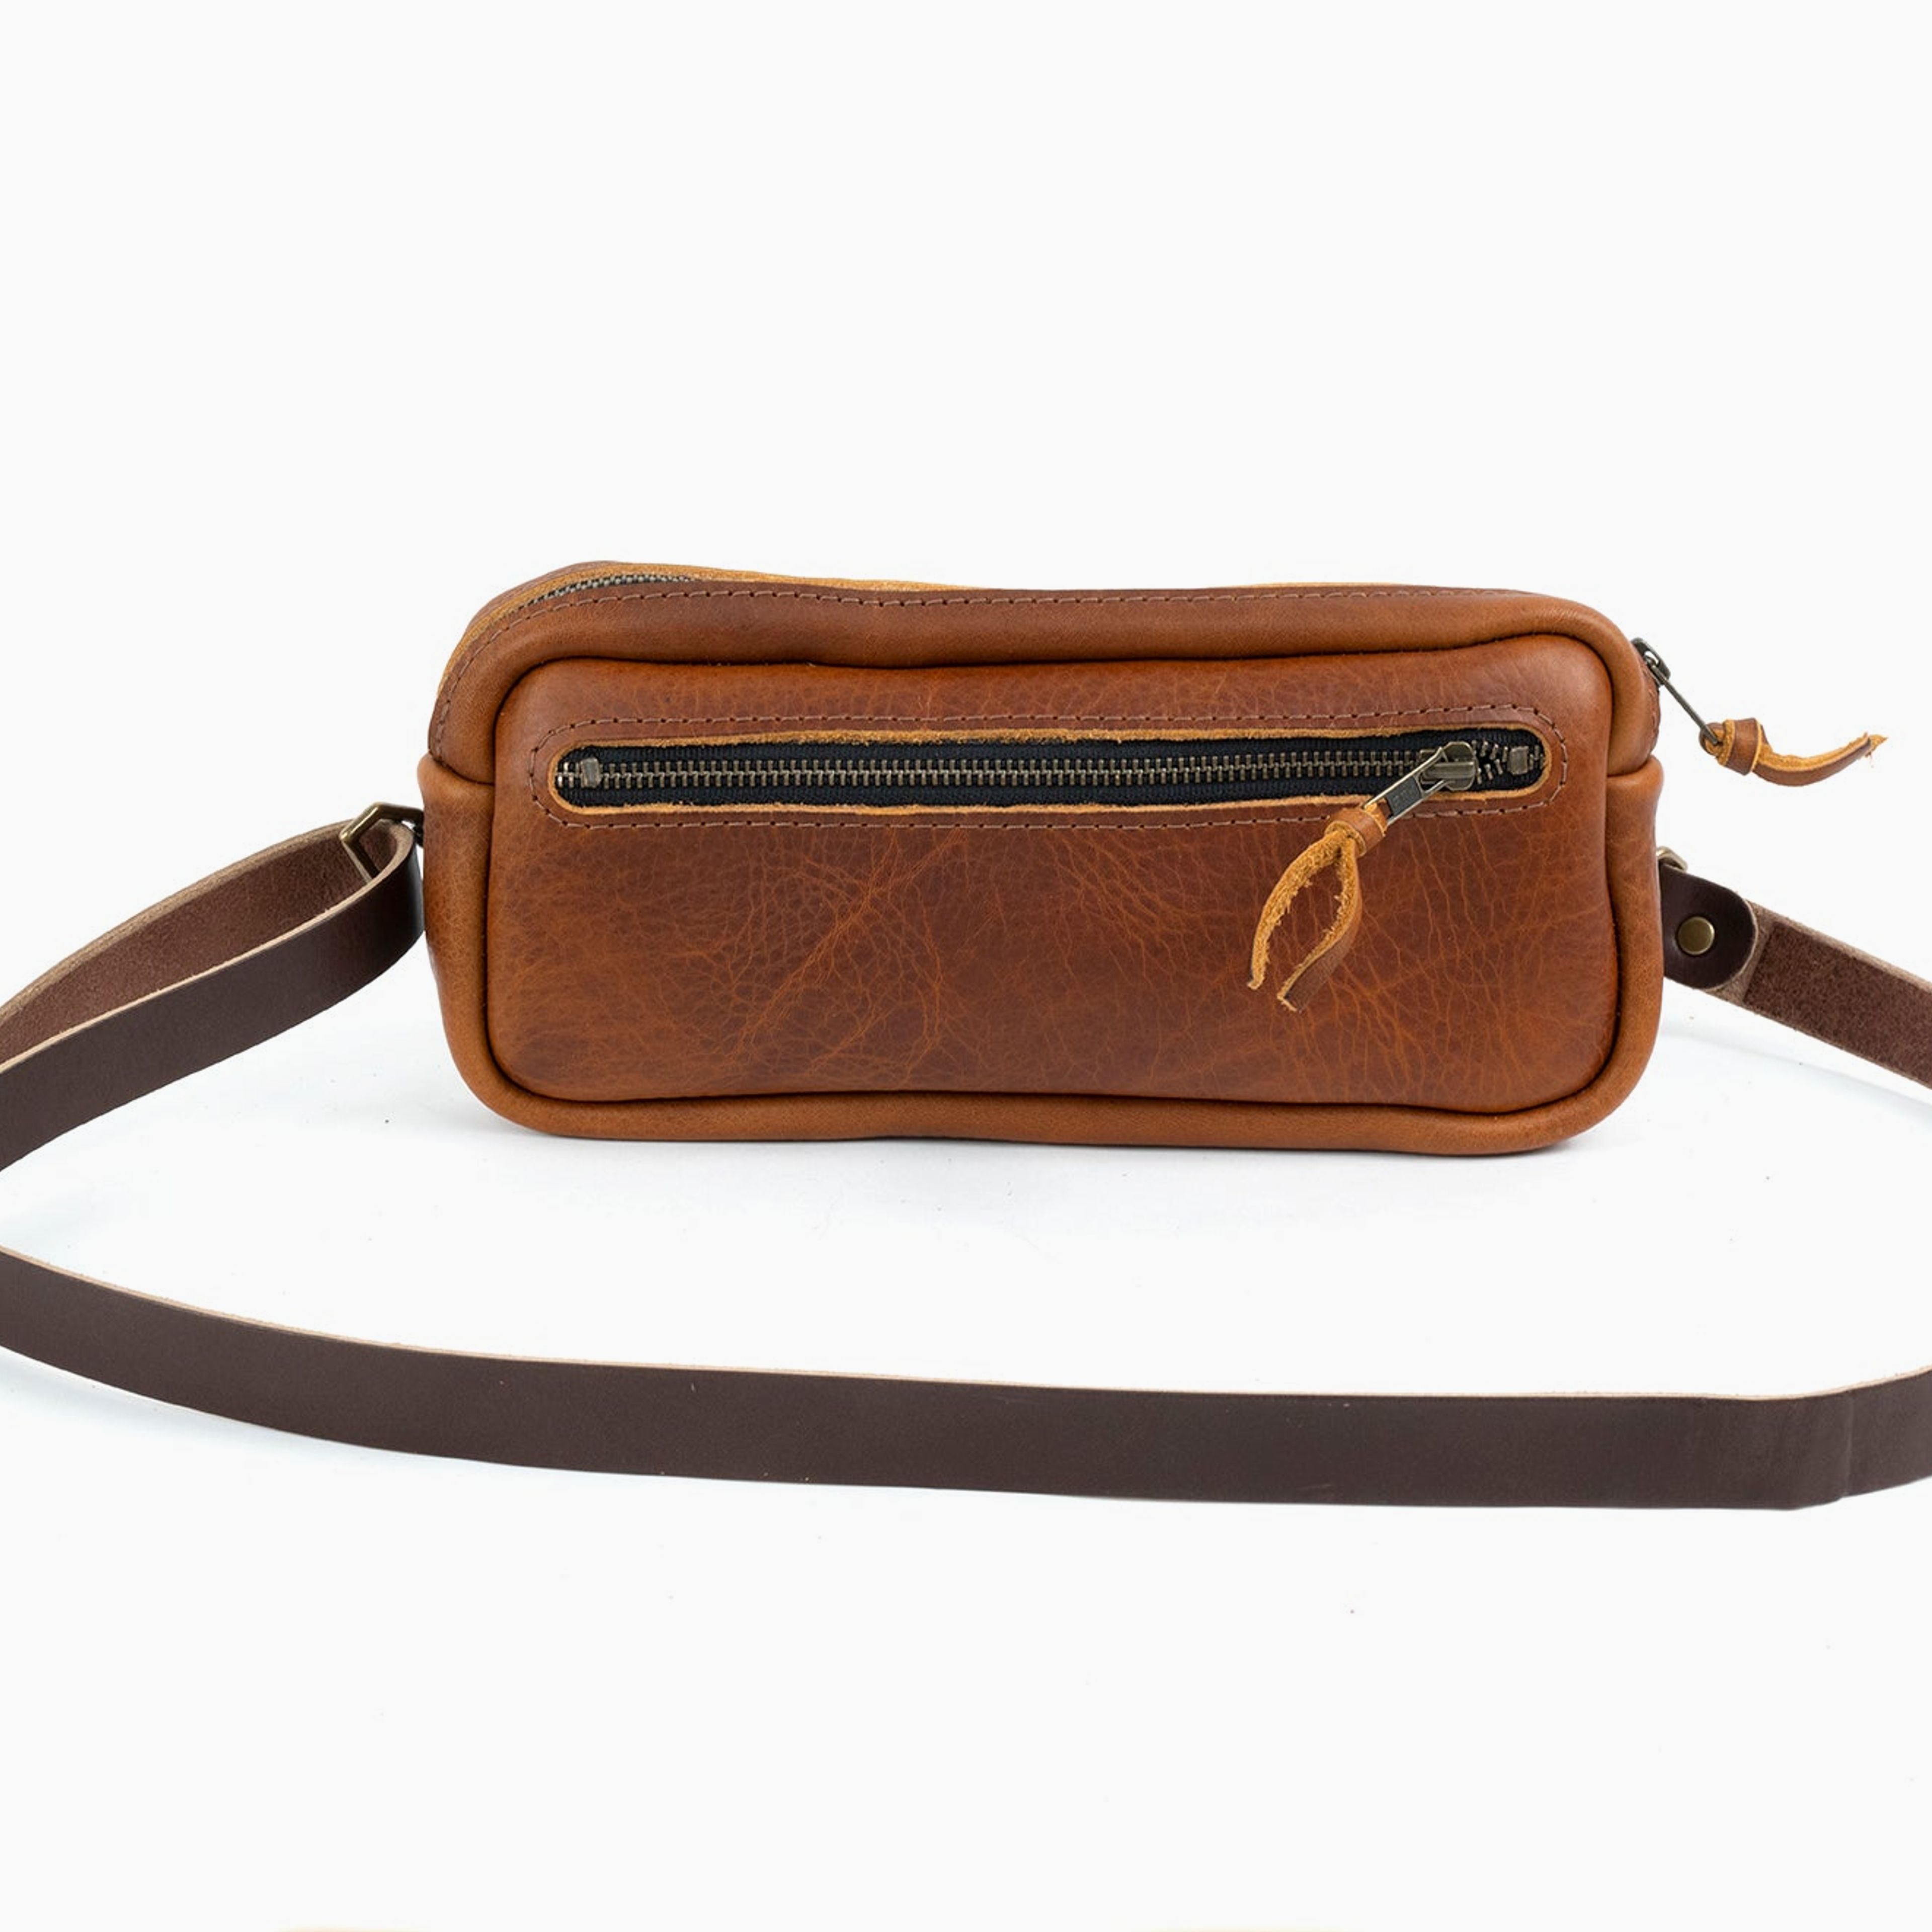 Leather Fanny Pack / Leather Waist Bag - Deluxe - Saddle